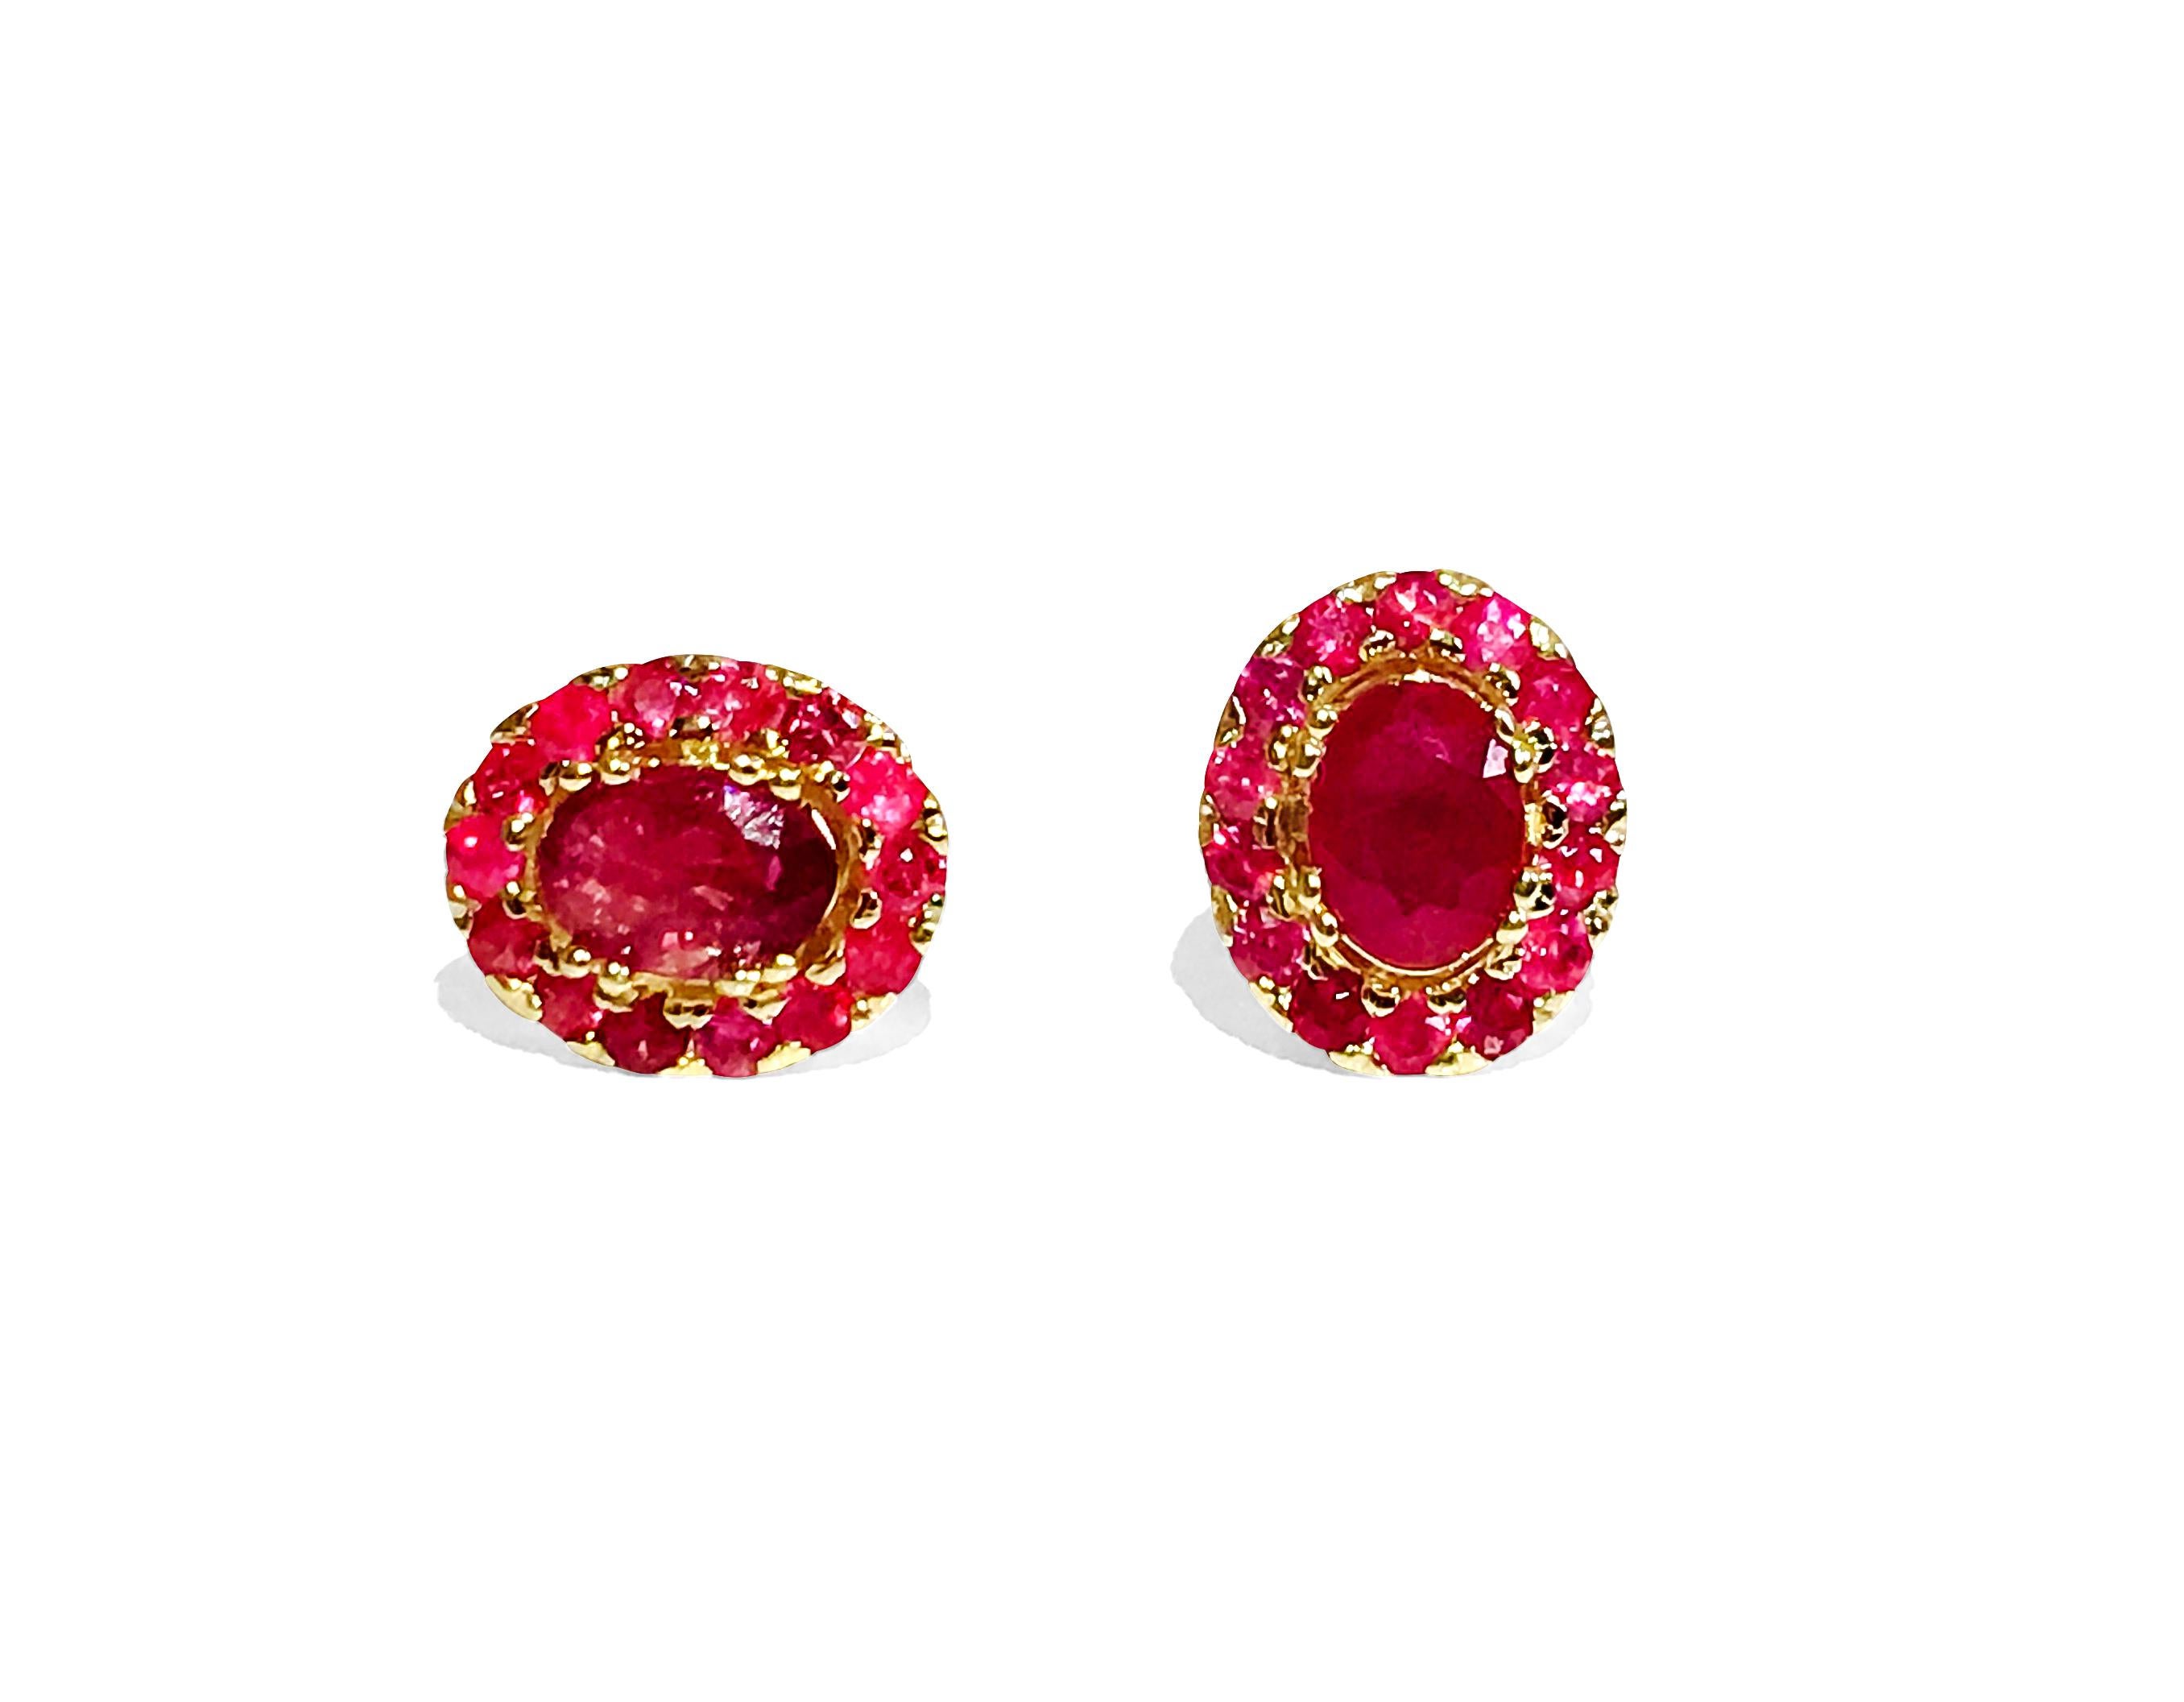 These are gold earrings with a big red stone in the middle and smaller ones on the sides. The main stone is 2.00 carats, and the smaller stones add up to 1.12 carats. In total, all the stones together weigh 3.12 carats. The red stones are real and